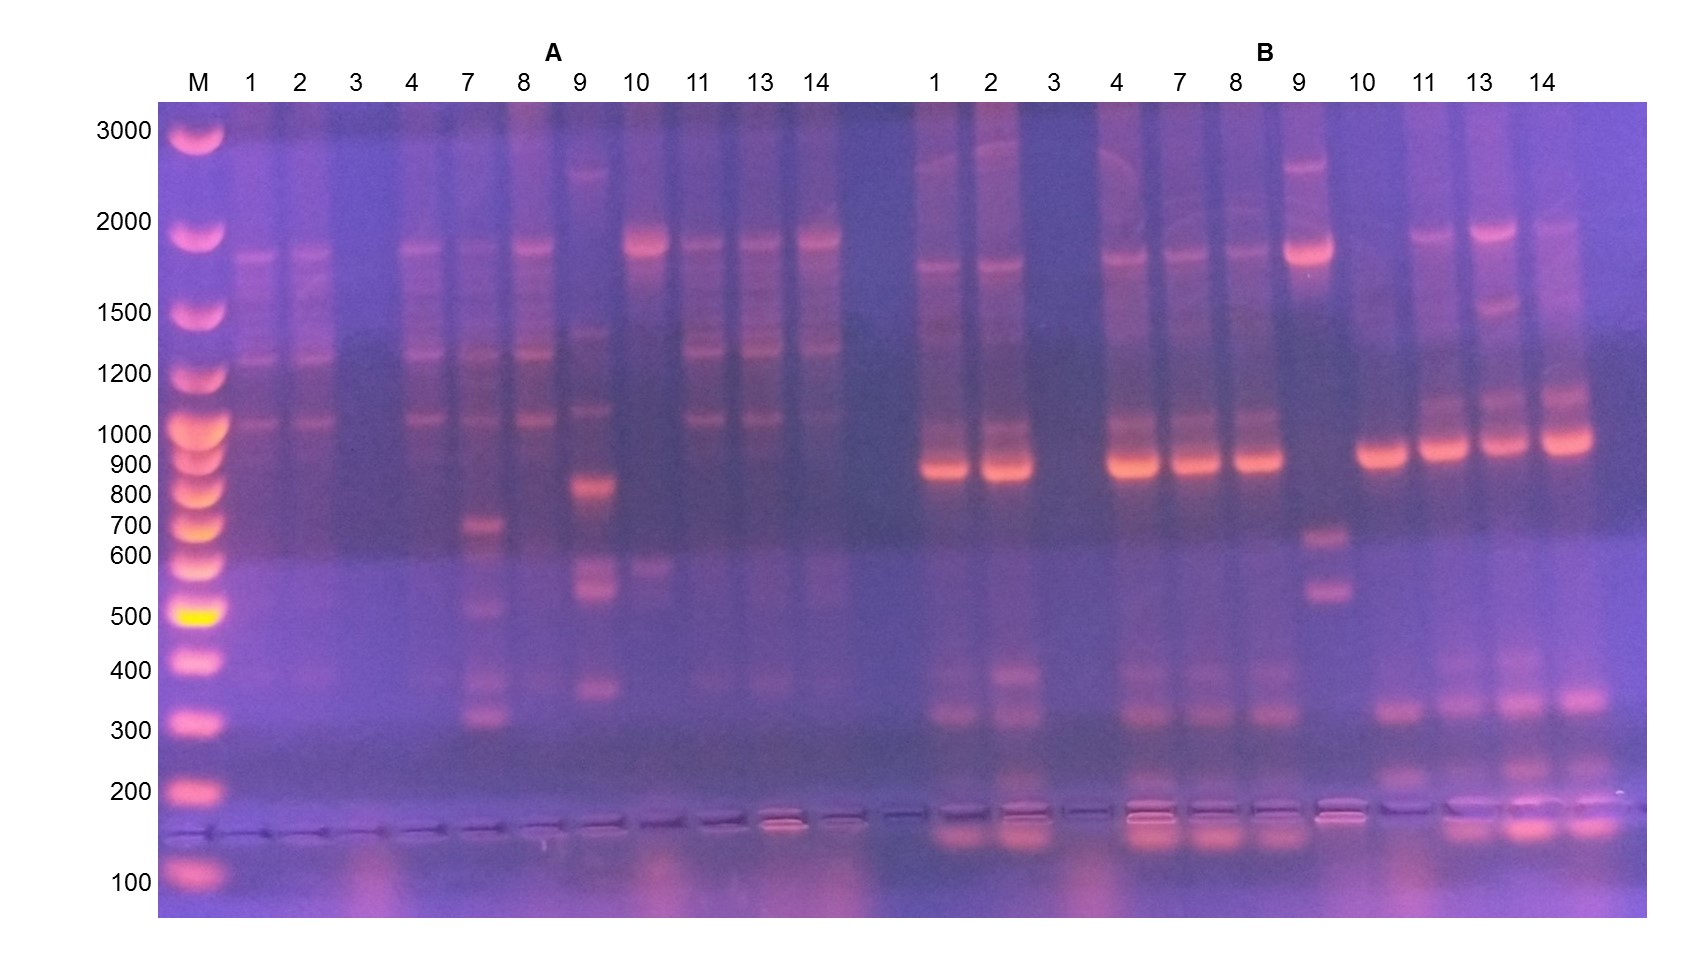 Genotyping B.subtilis strains using primer OPA-3 (left, A) and primer OPL-12 (right, B)